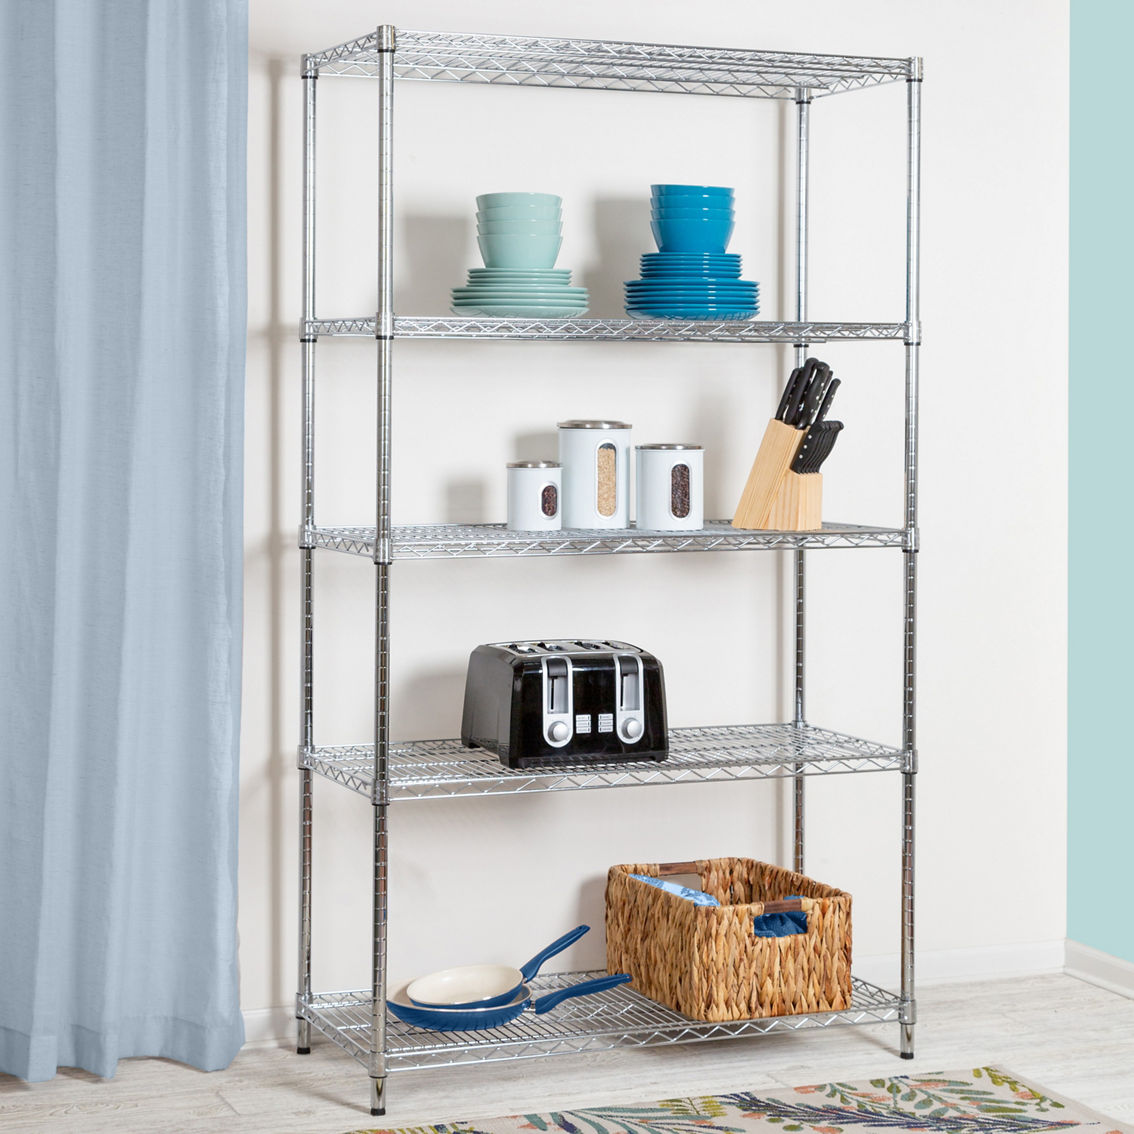 Honey Can Do 5 Tier Heavy Duty Adjustable Shelving Unit - Image 4 of 7